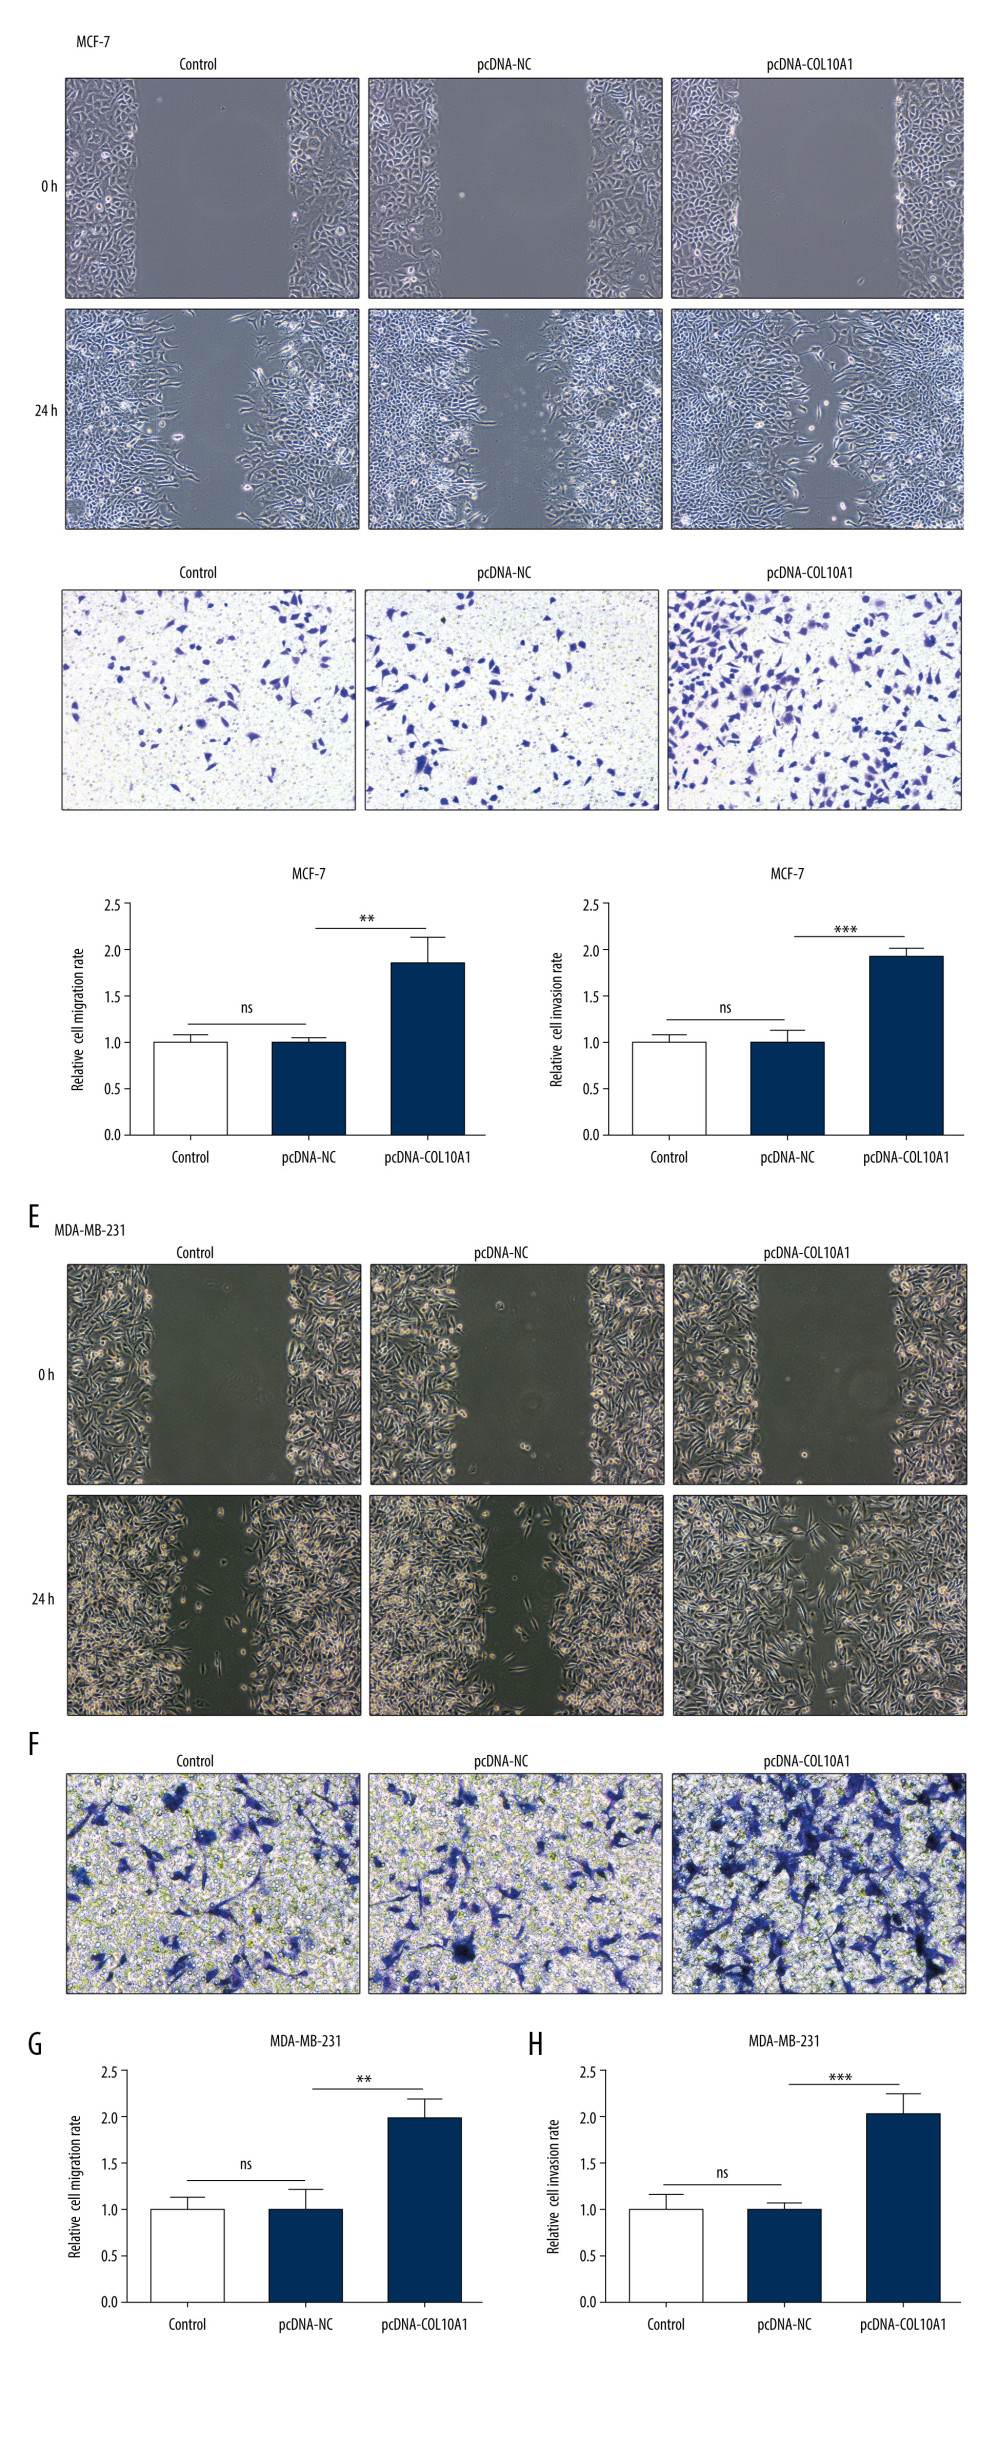 Upregulation of COL10A1 boosted the migration and invasion of breast cancer cells. (A, C). Wound healing assay was used to examine the effect of COL10A1 overexpression on MCF-7 cell migration (100×). (B, D). Transwell assay was used to examine the effect of COL10A1 overexpression on MCF-7 cell invasion (100×). (E, G). Wound healing assay was used to examine the effect of COL10A1 overexpression on MDA-MB-231 cell migration (100×). (F, H). Transwell assay was used to examine the effect of COL10A1 overexpression on MDA-MB-231 cell invasion (100X). ** P<0.01, *** P<0.001.